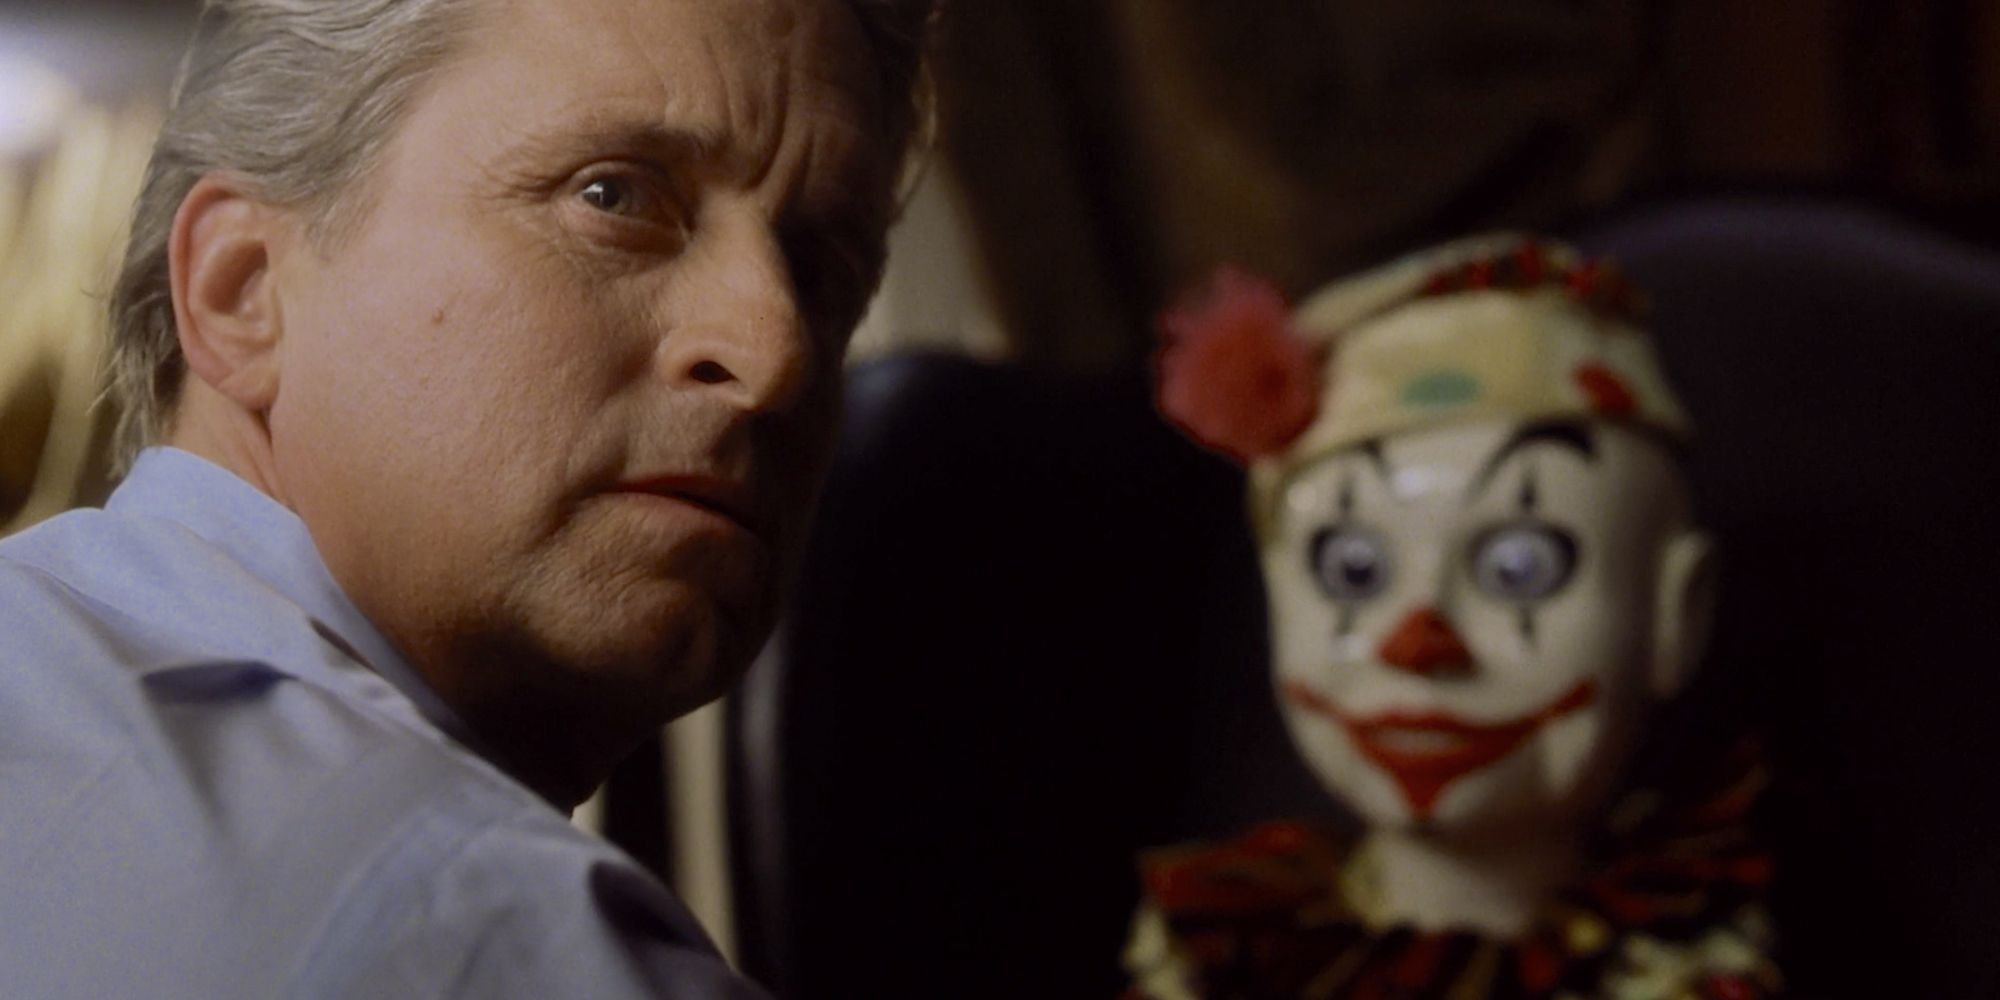 Michael Douglas as Nicholas Van Orton turning away from a toy clown in The Game